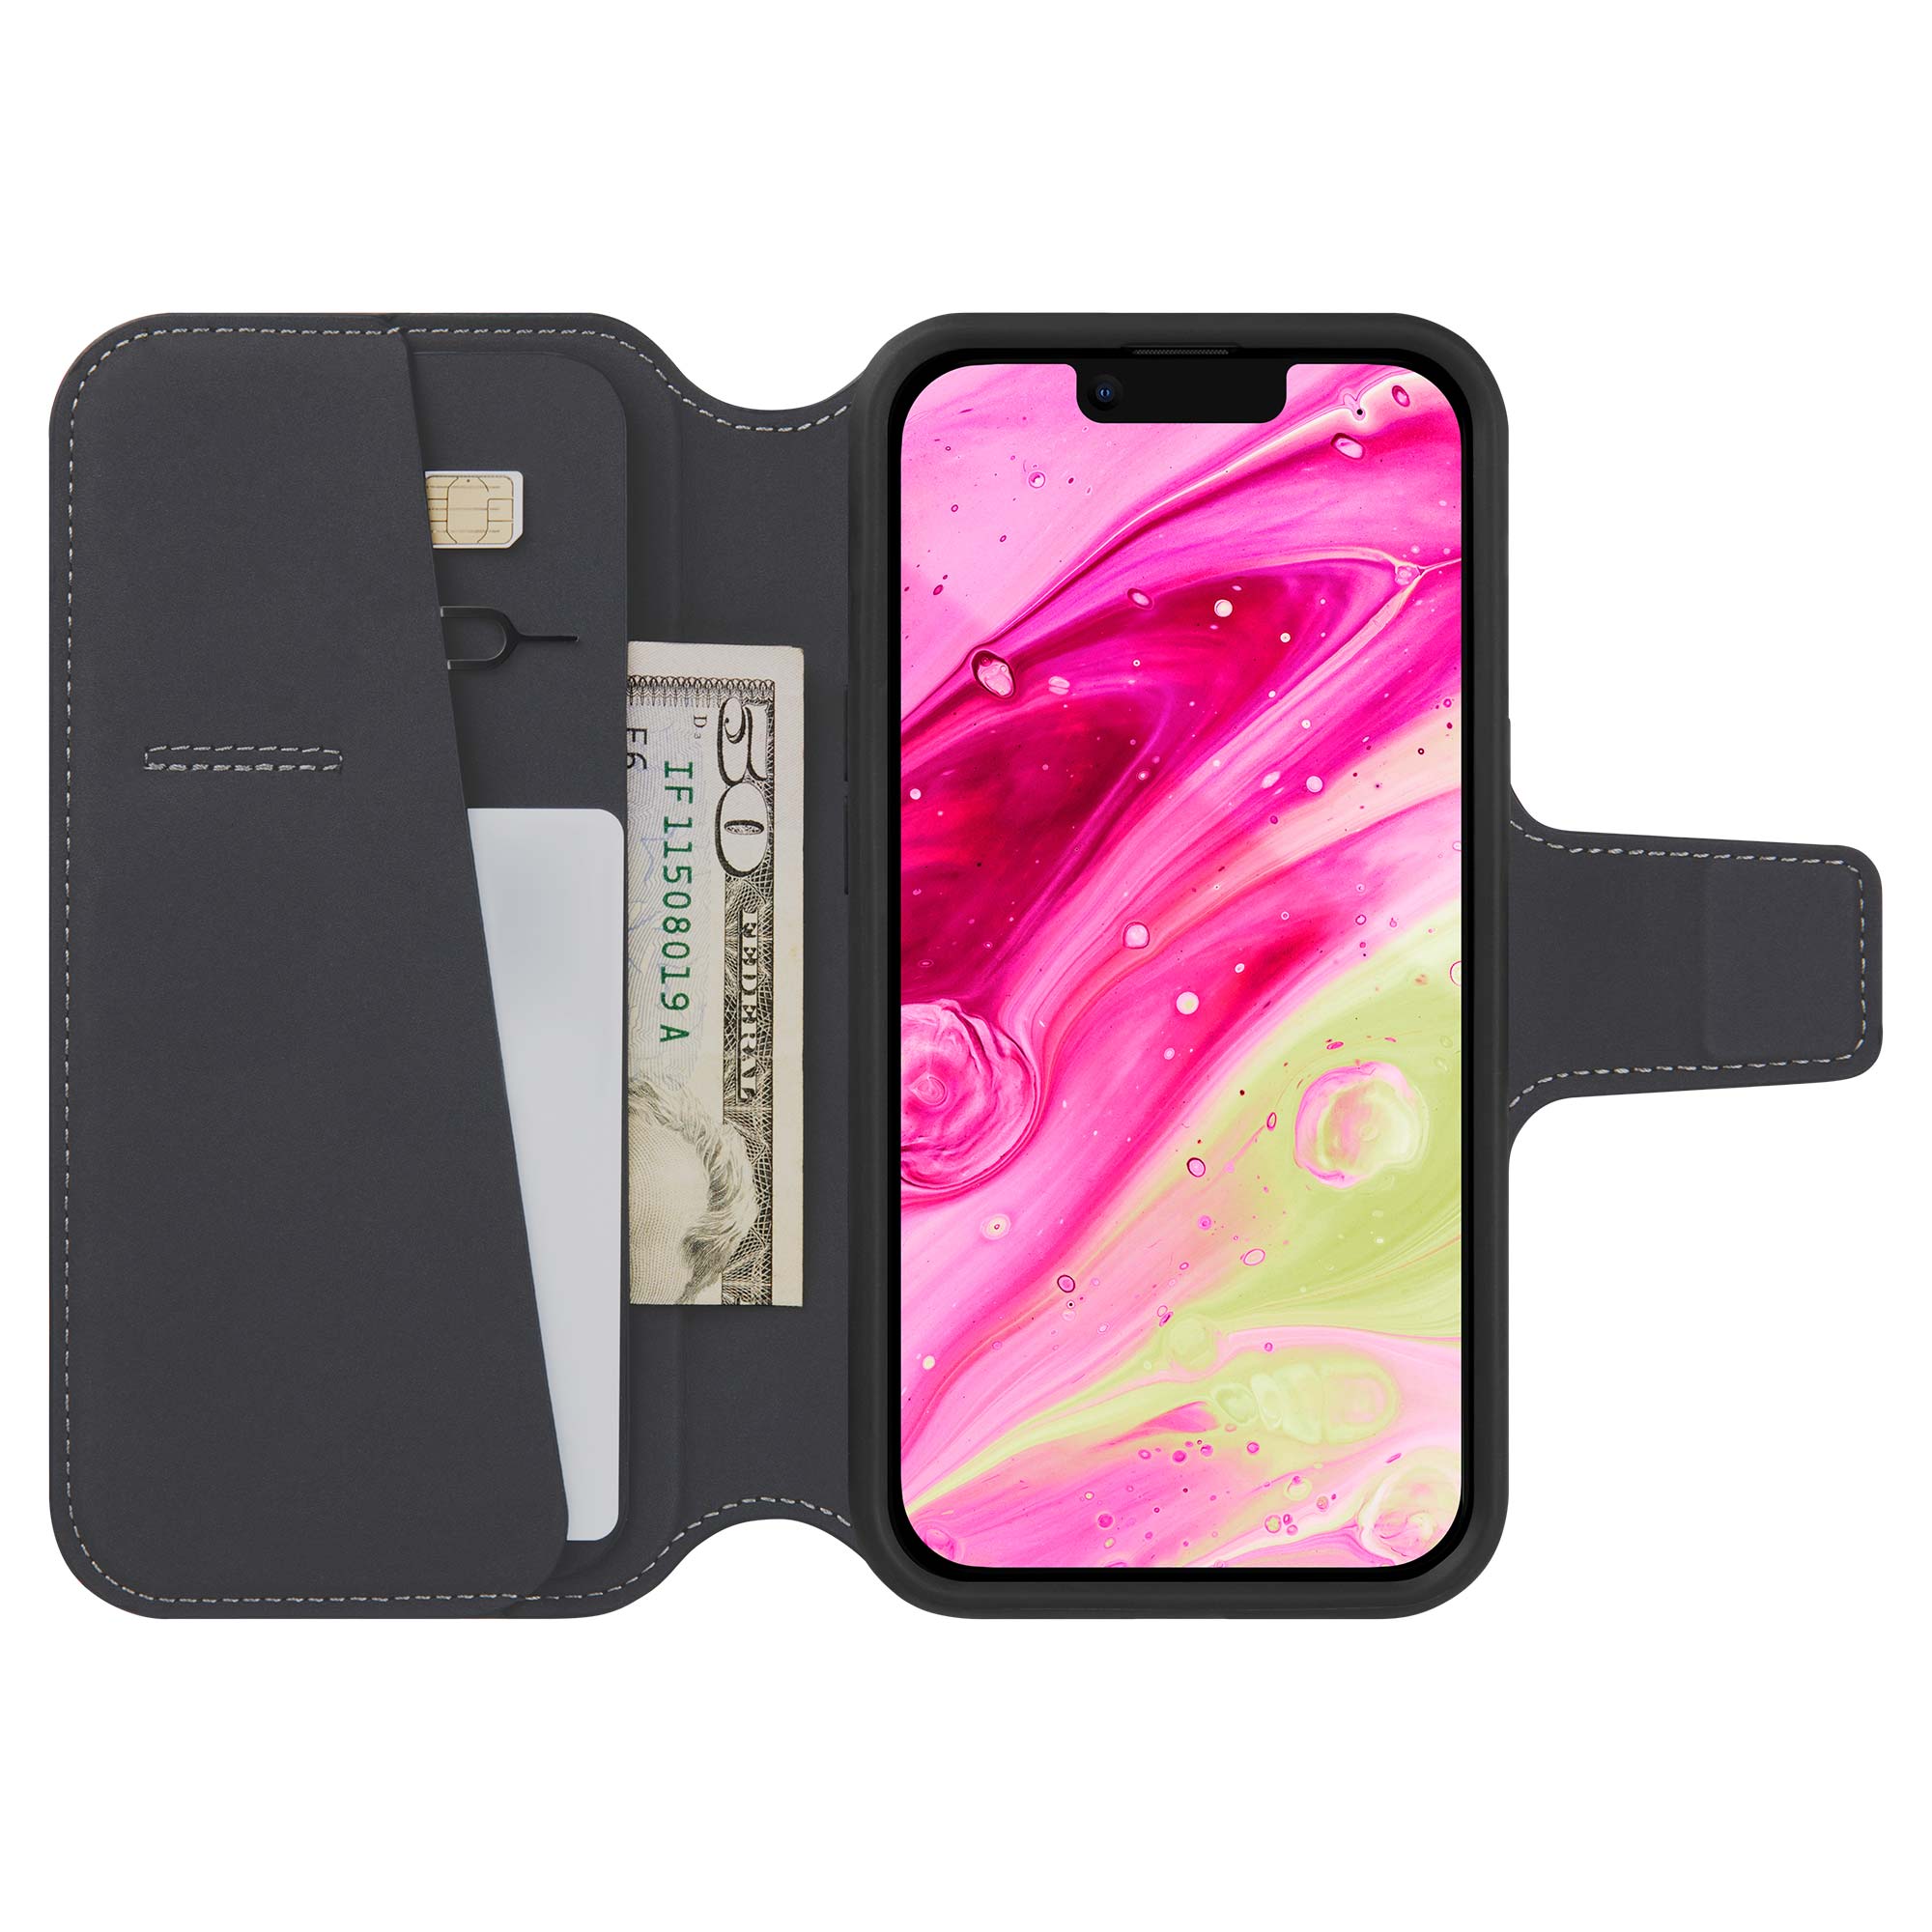 URBAN FOLIO case Compatible with MagSafe for iPhone 14 Series